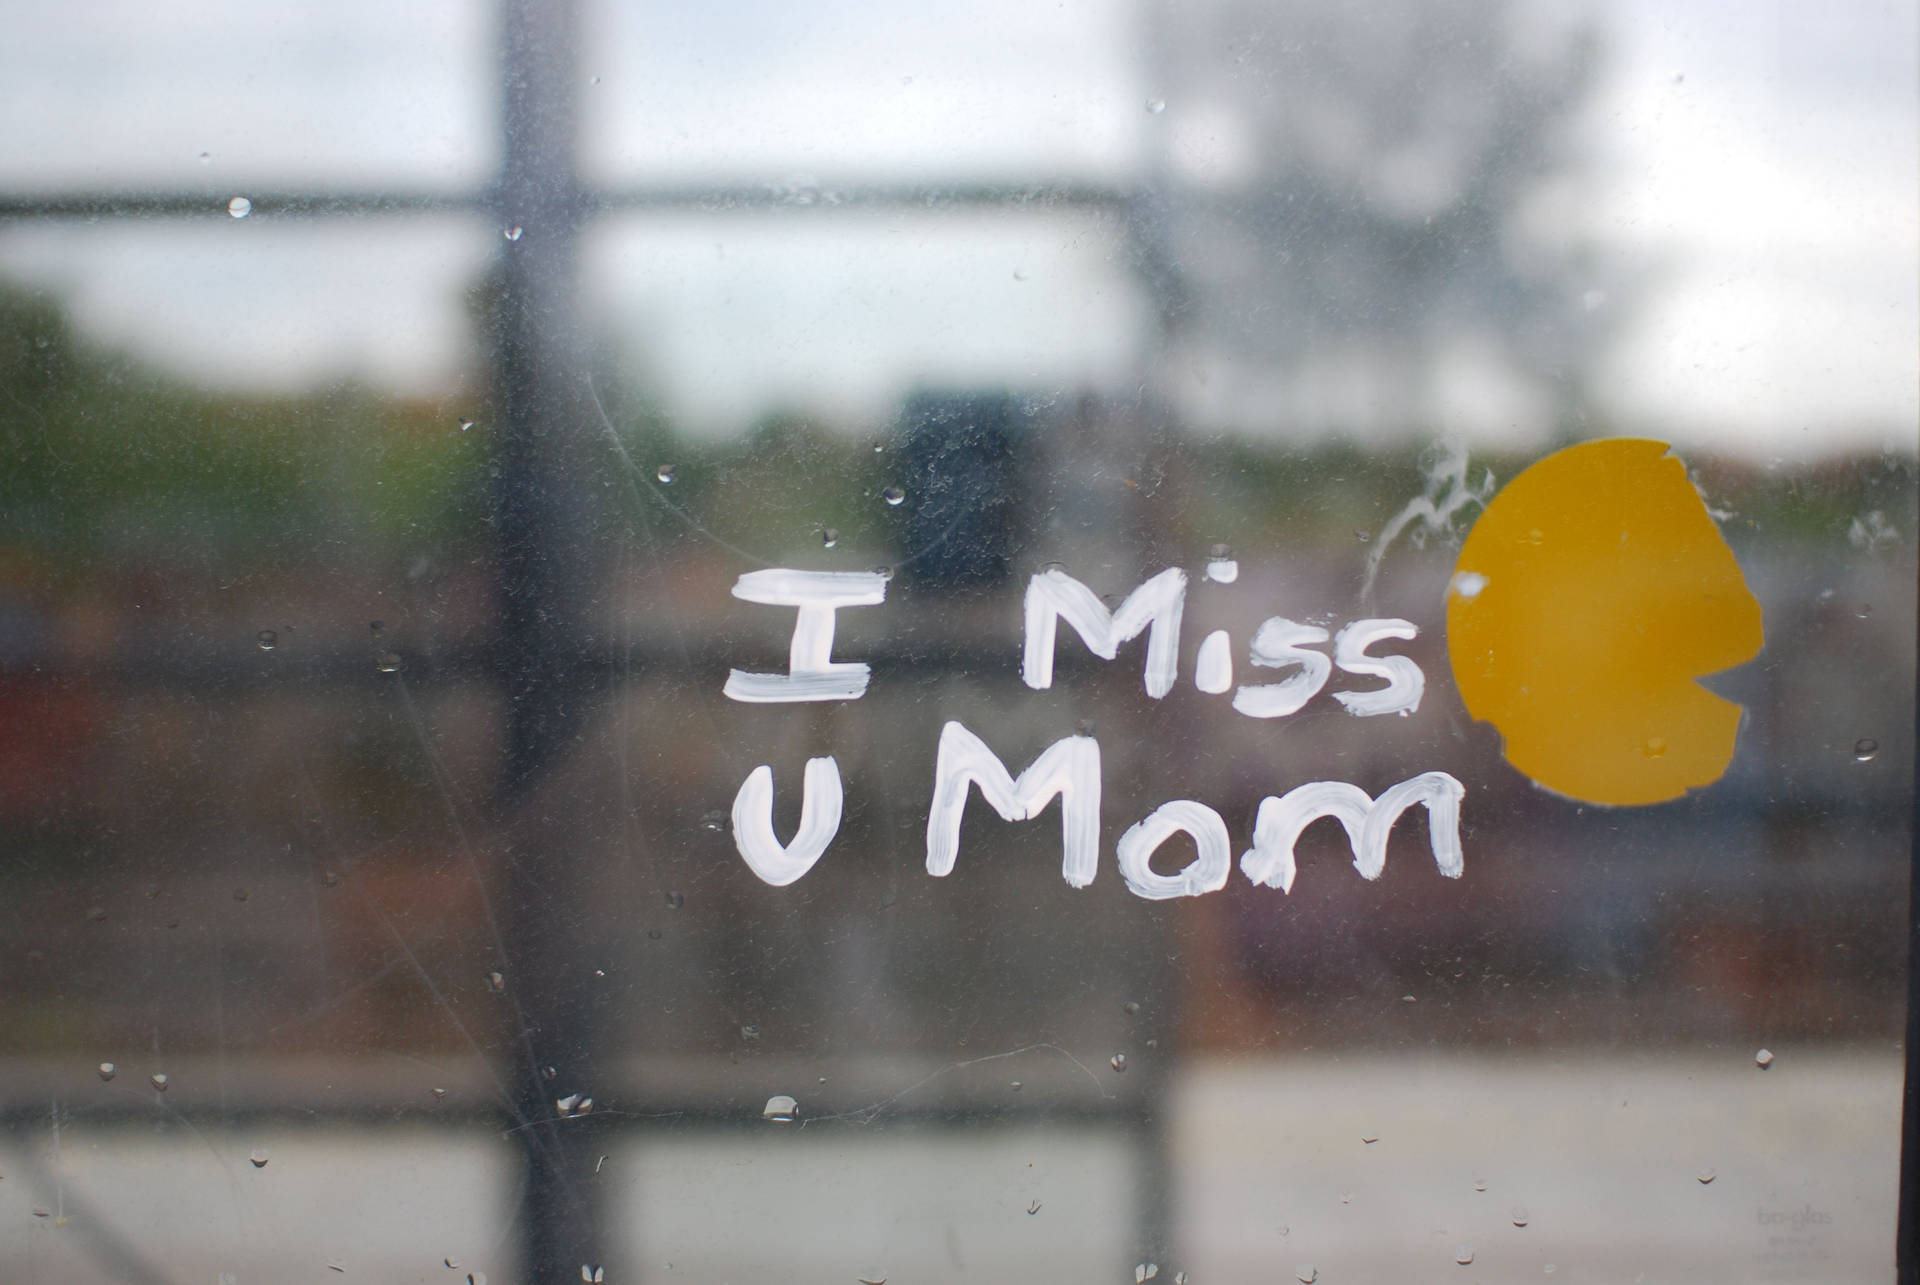 Missing You Mom